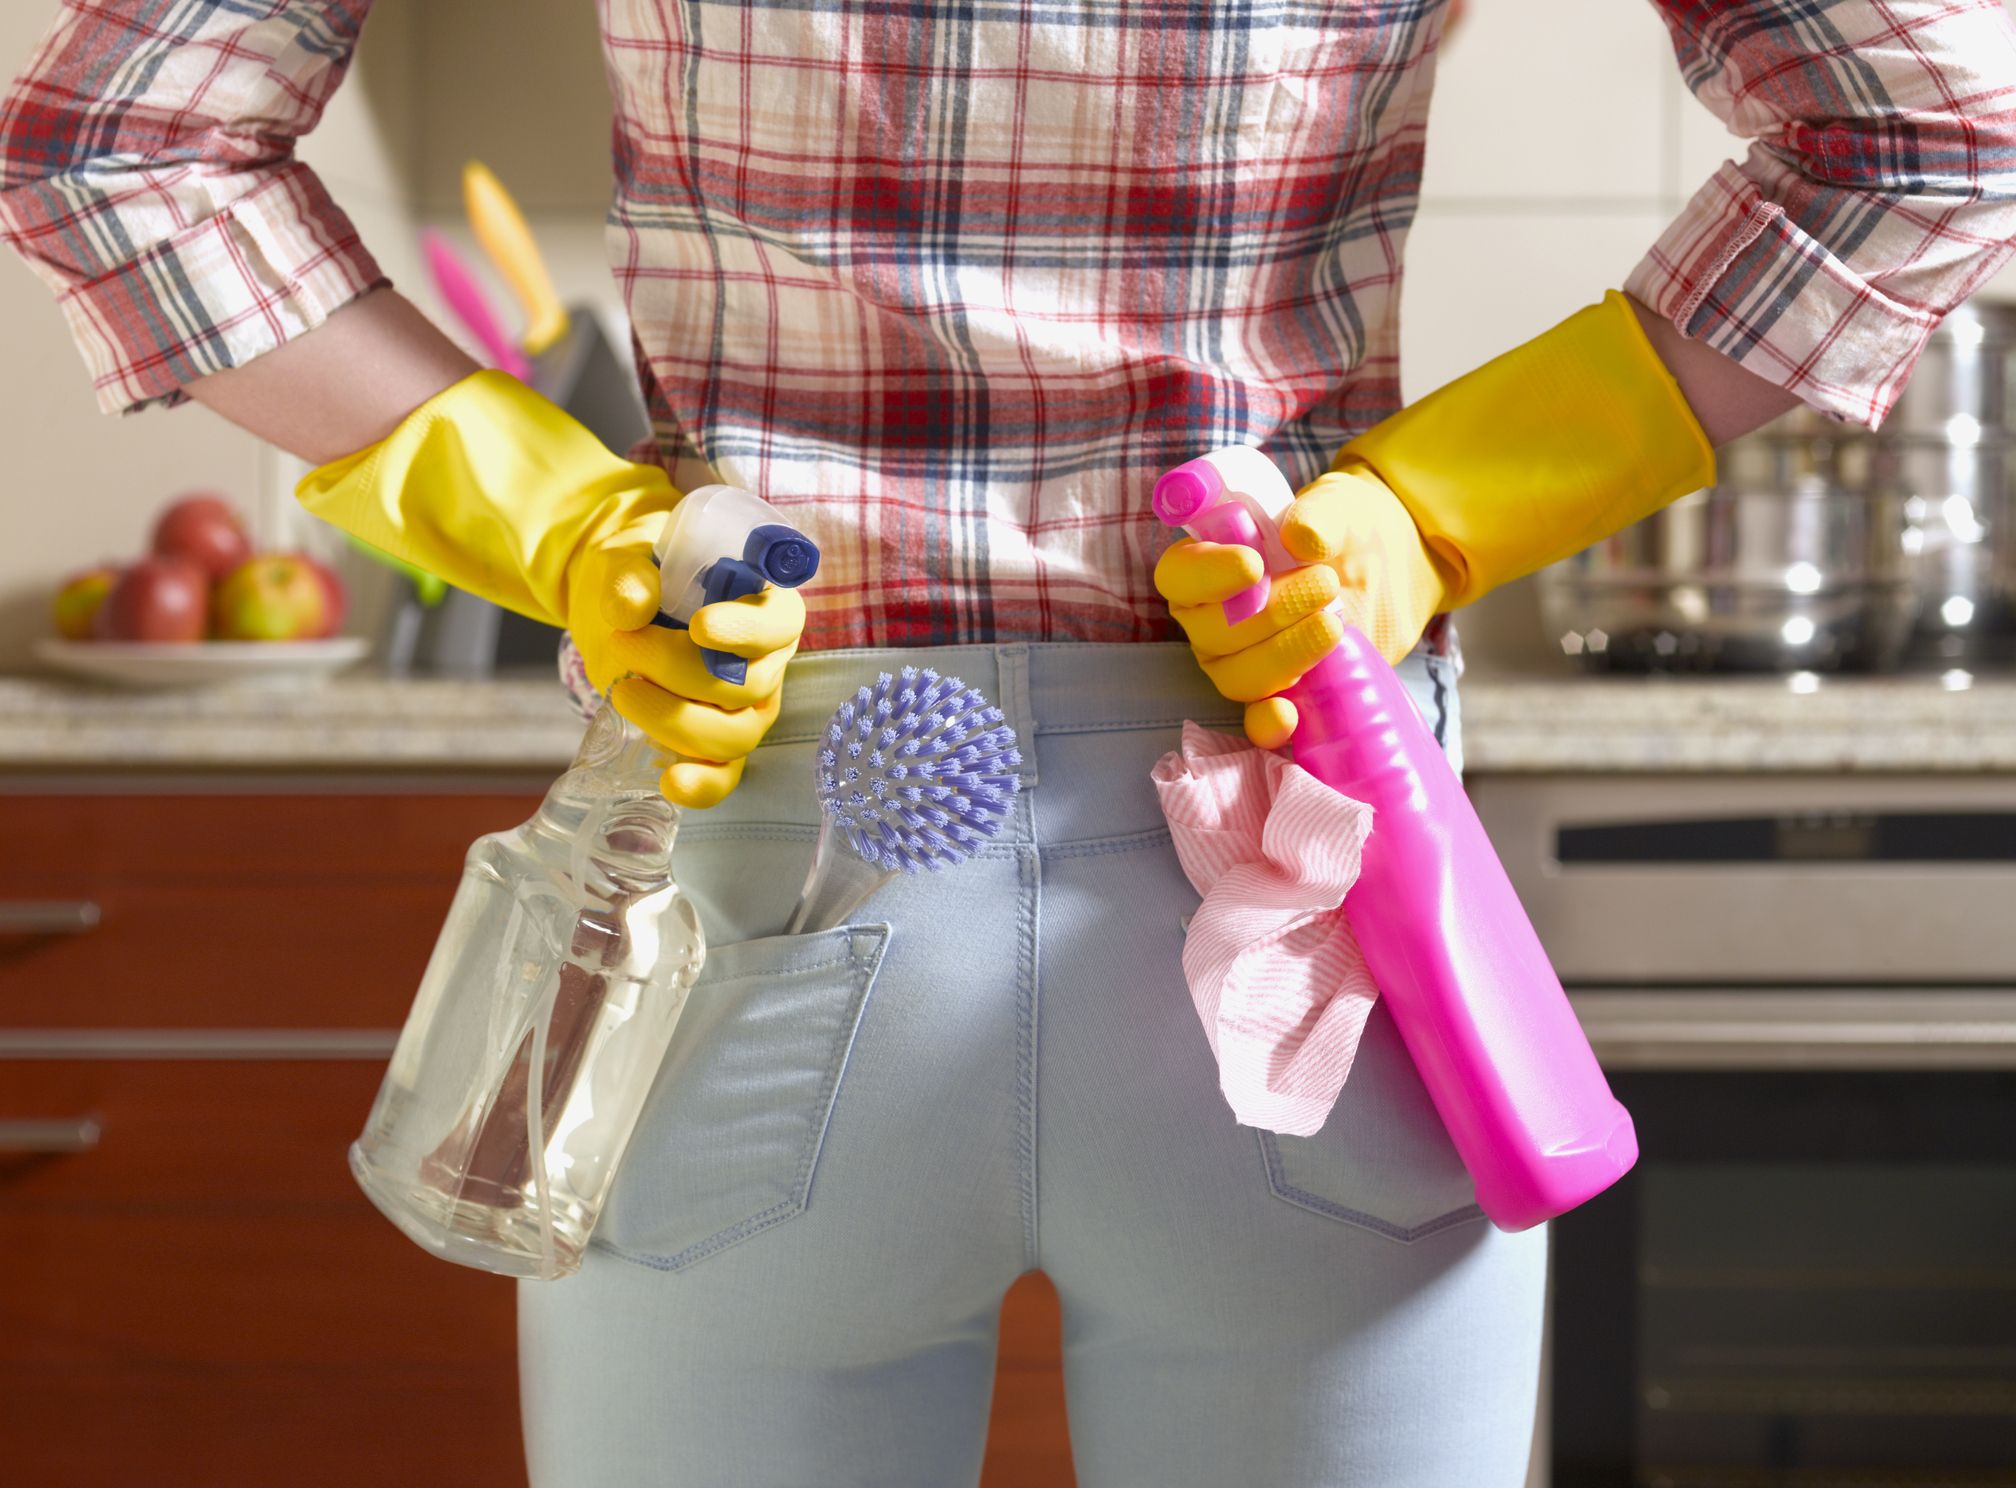 How to Deep Clean Your House: 5 Cleaning Mistakes You're Making 